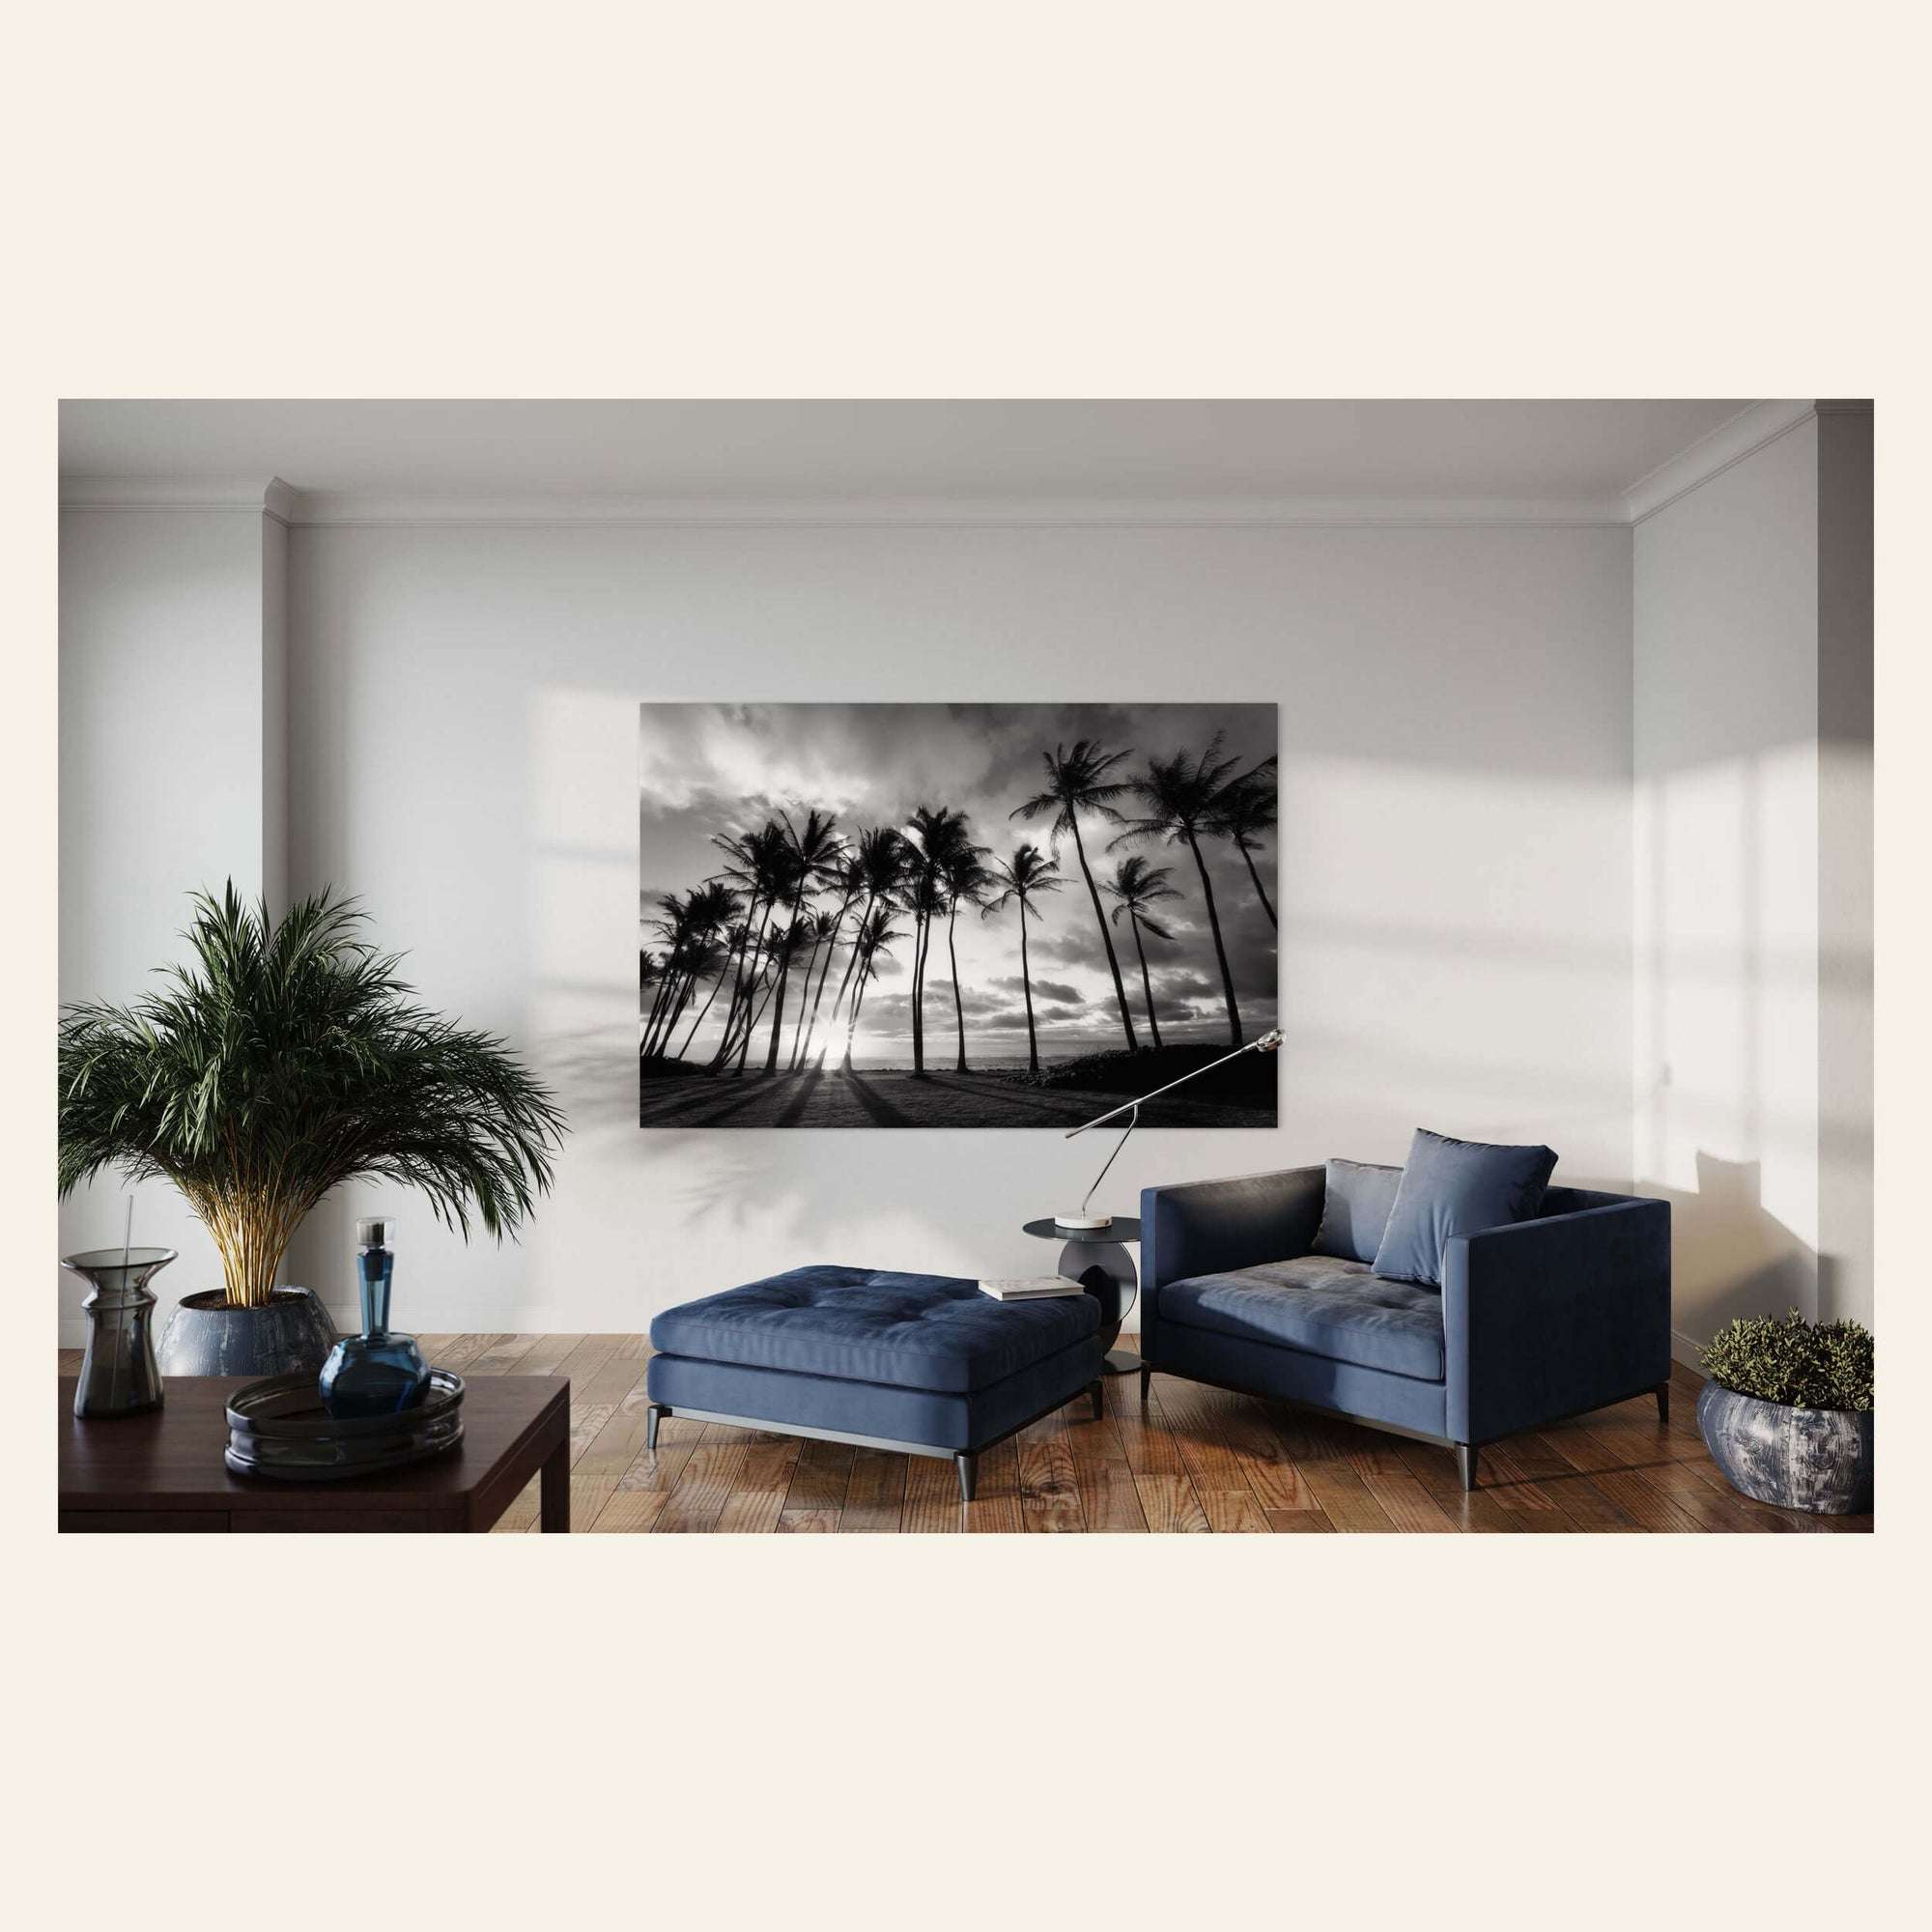 A palm tree picture at sunrise in Kapaa, Kauai, hangs in a living room.